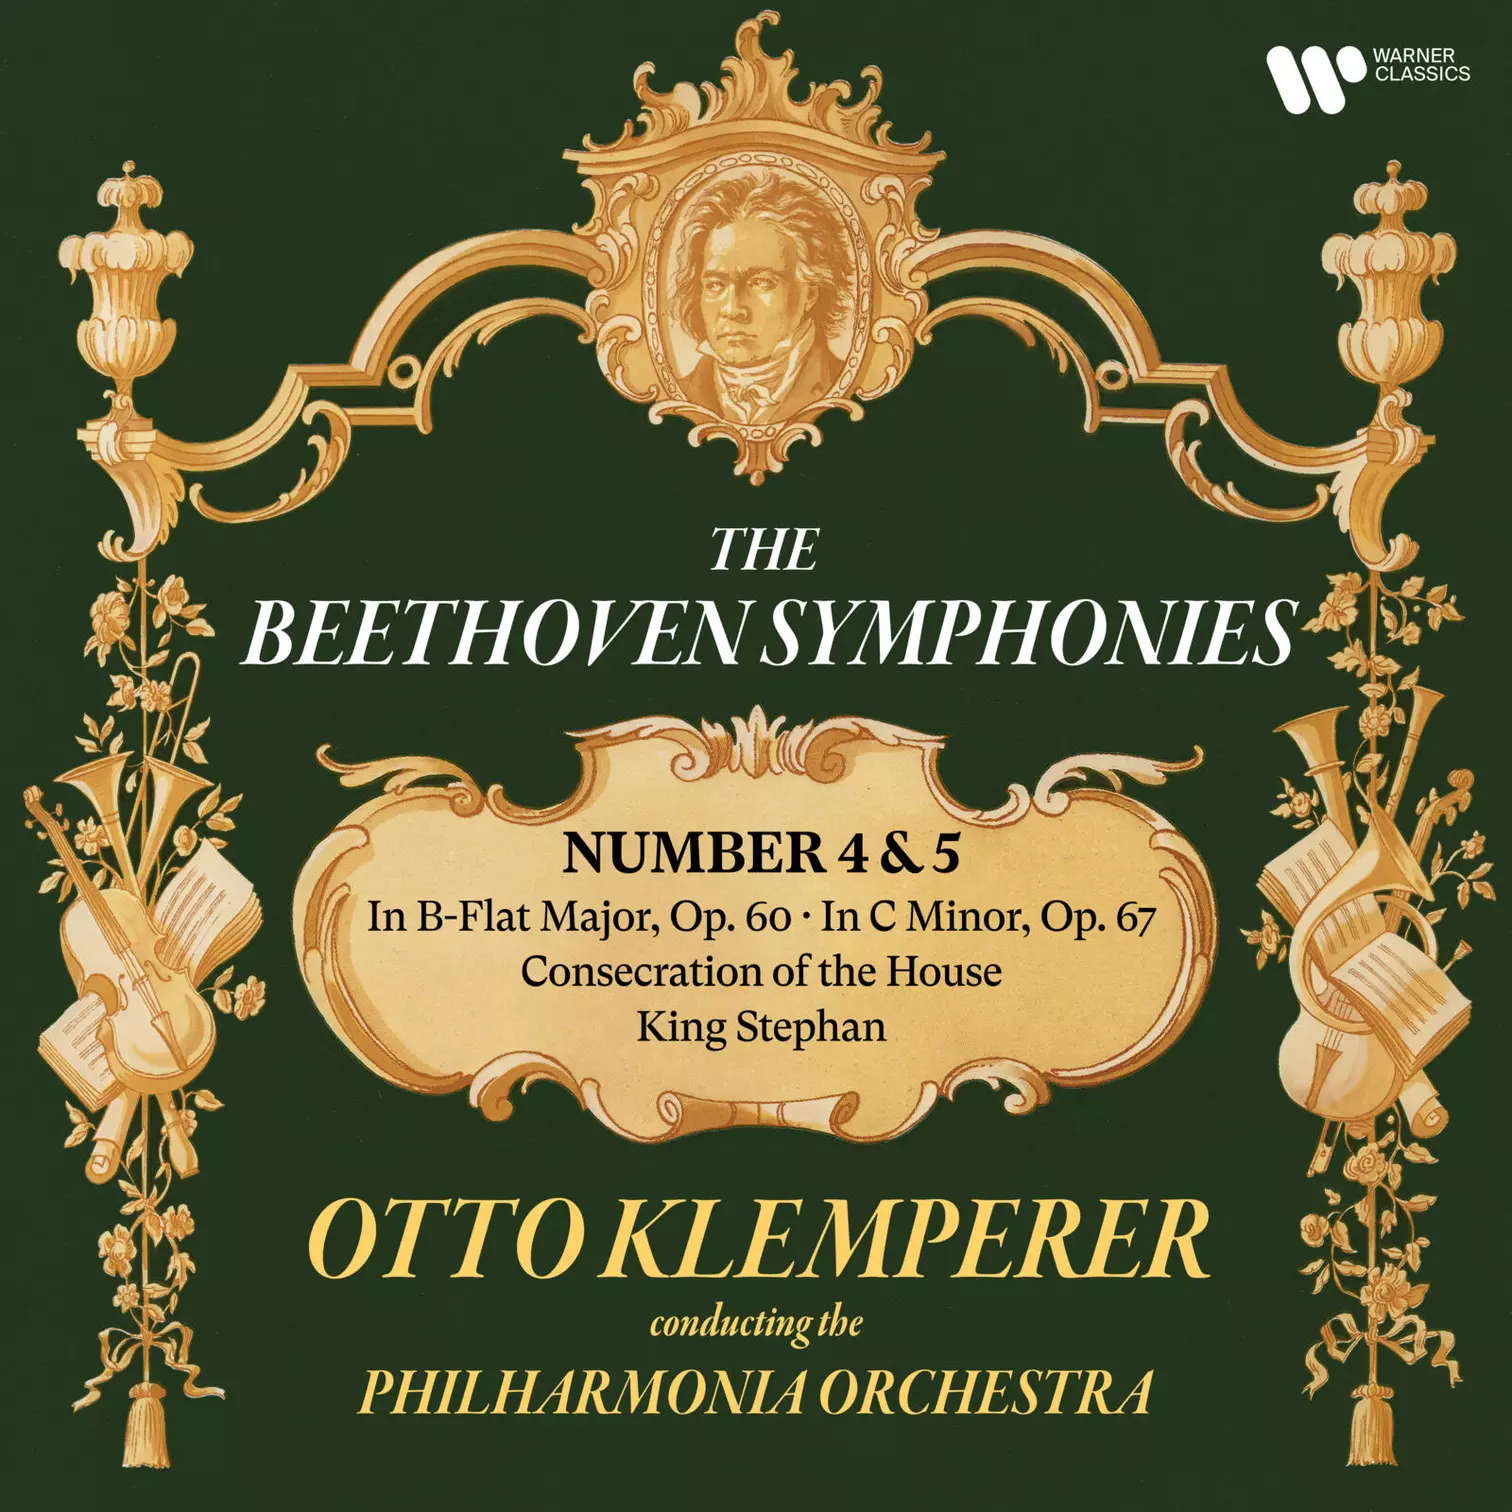  Beethoven: Symphonies Nos. 4 & 5, Consecration of the House & King Stephan, Philharmonia Orchestra & Otto Klemperer